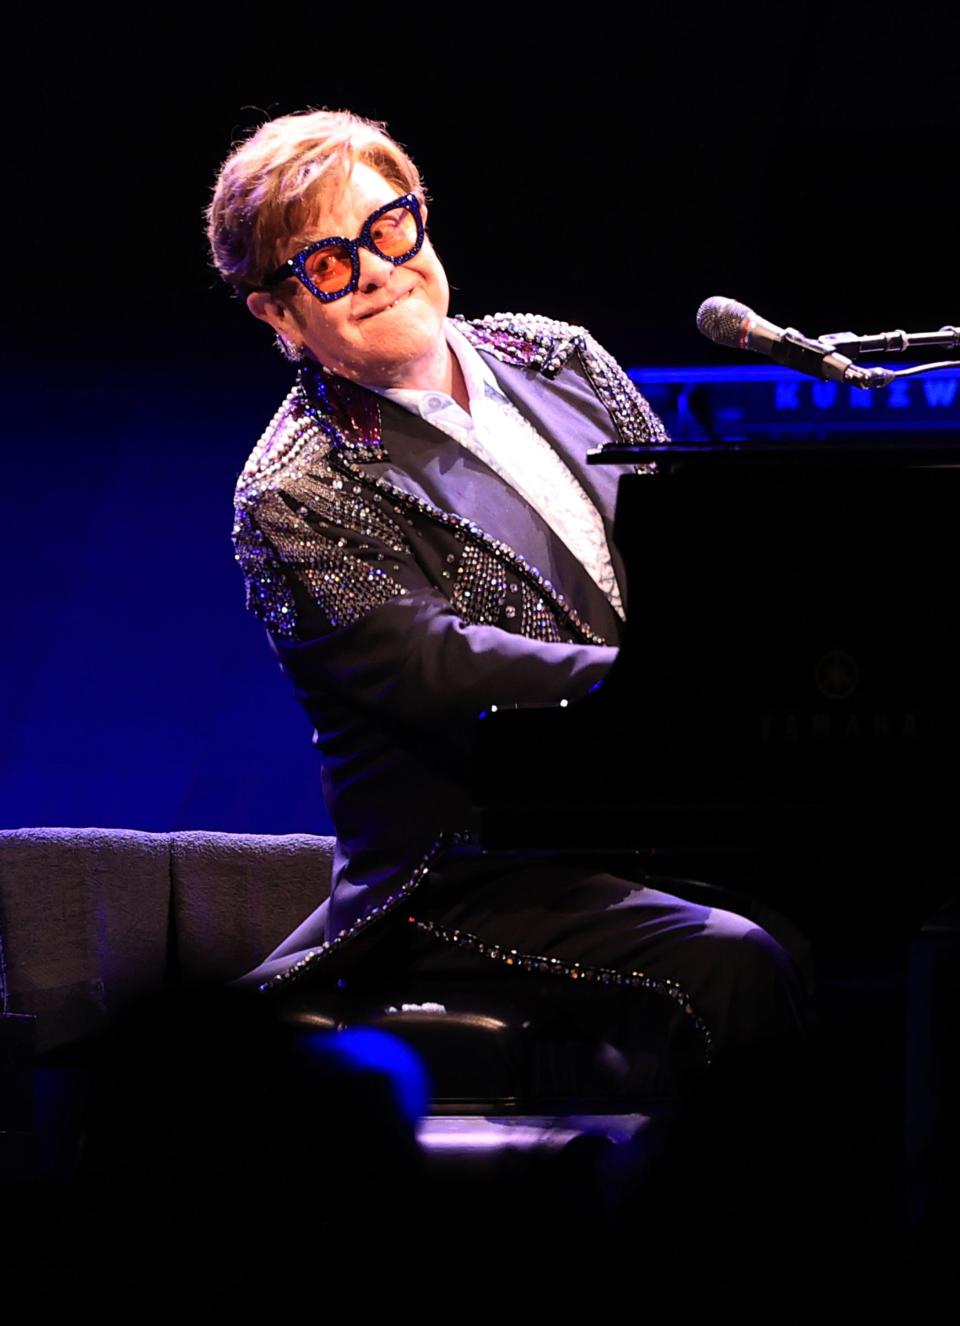 "There’s violence, laws enacted in Florida which are disgraceful," Elton John told Radio Times in an interview where the singer discussed homophobia in the US.